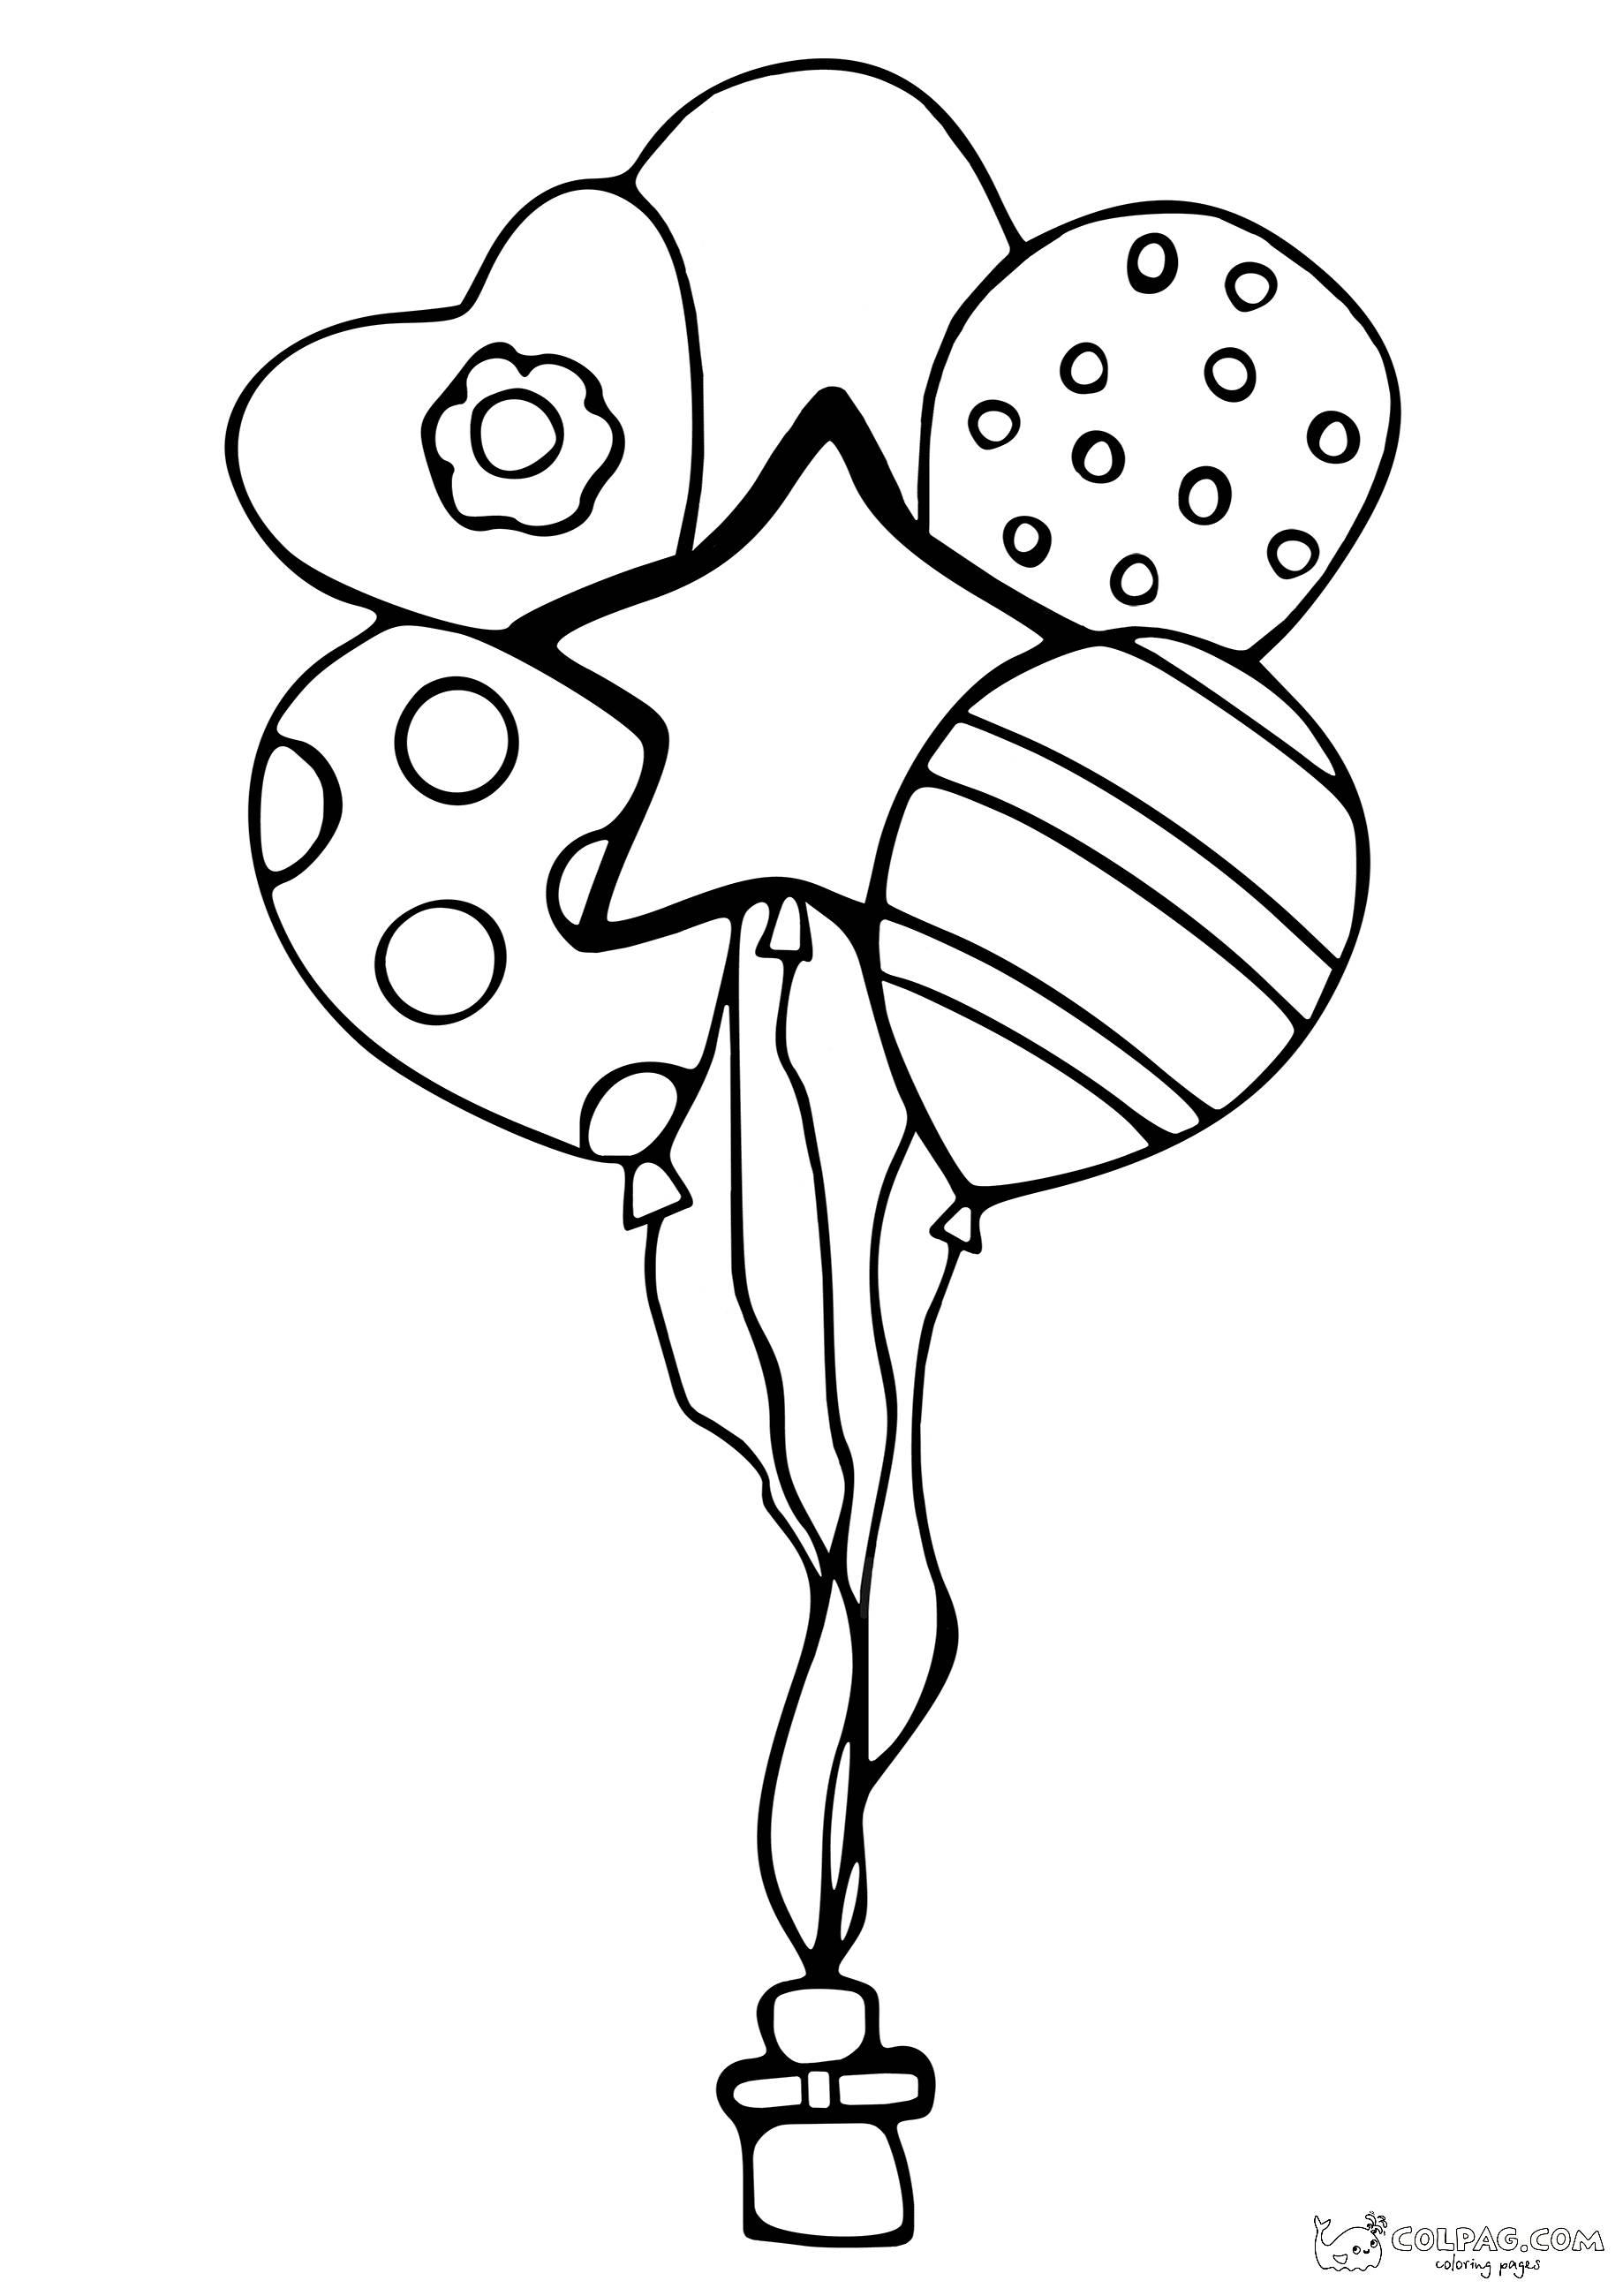 14-different-funny-baloons-coloring-page-colpag-14